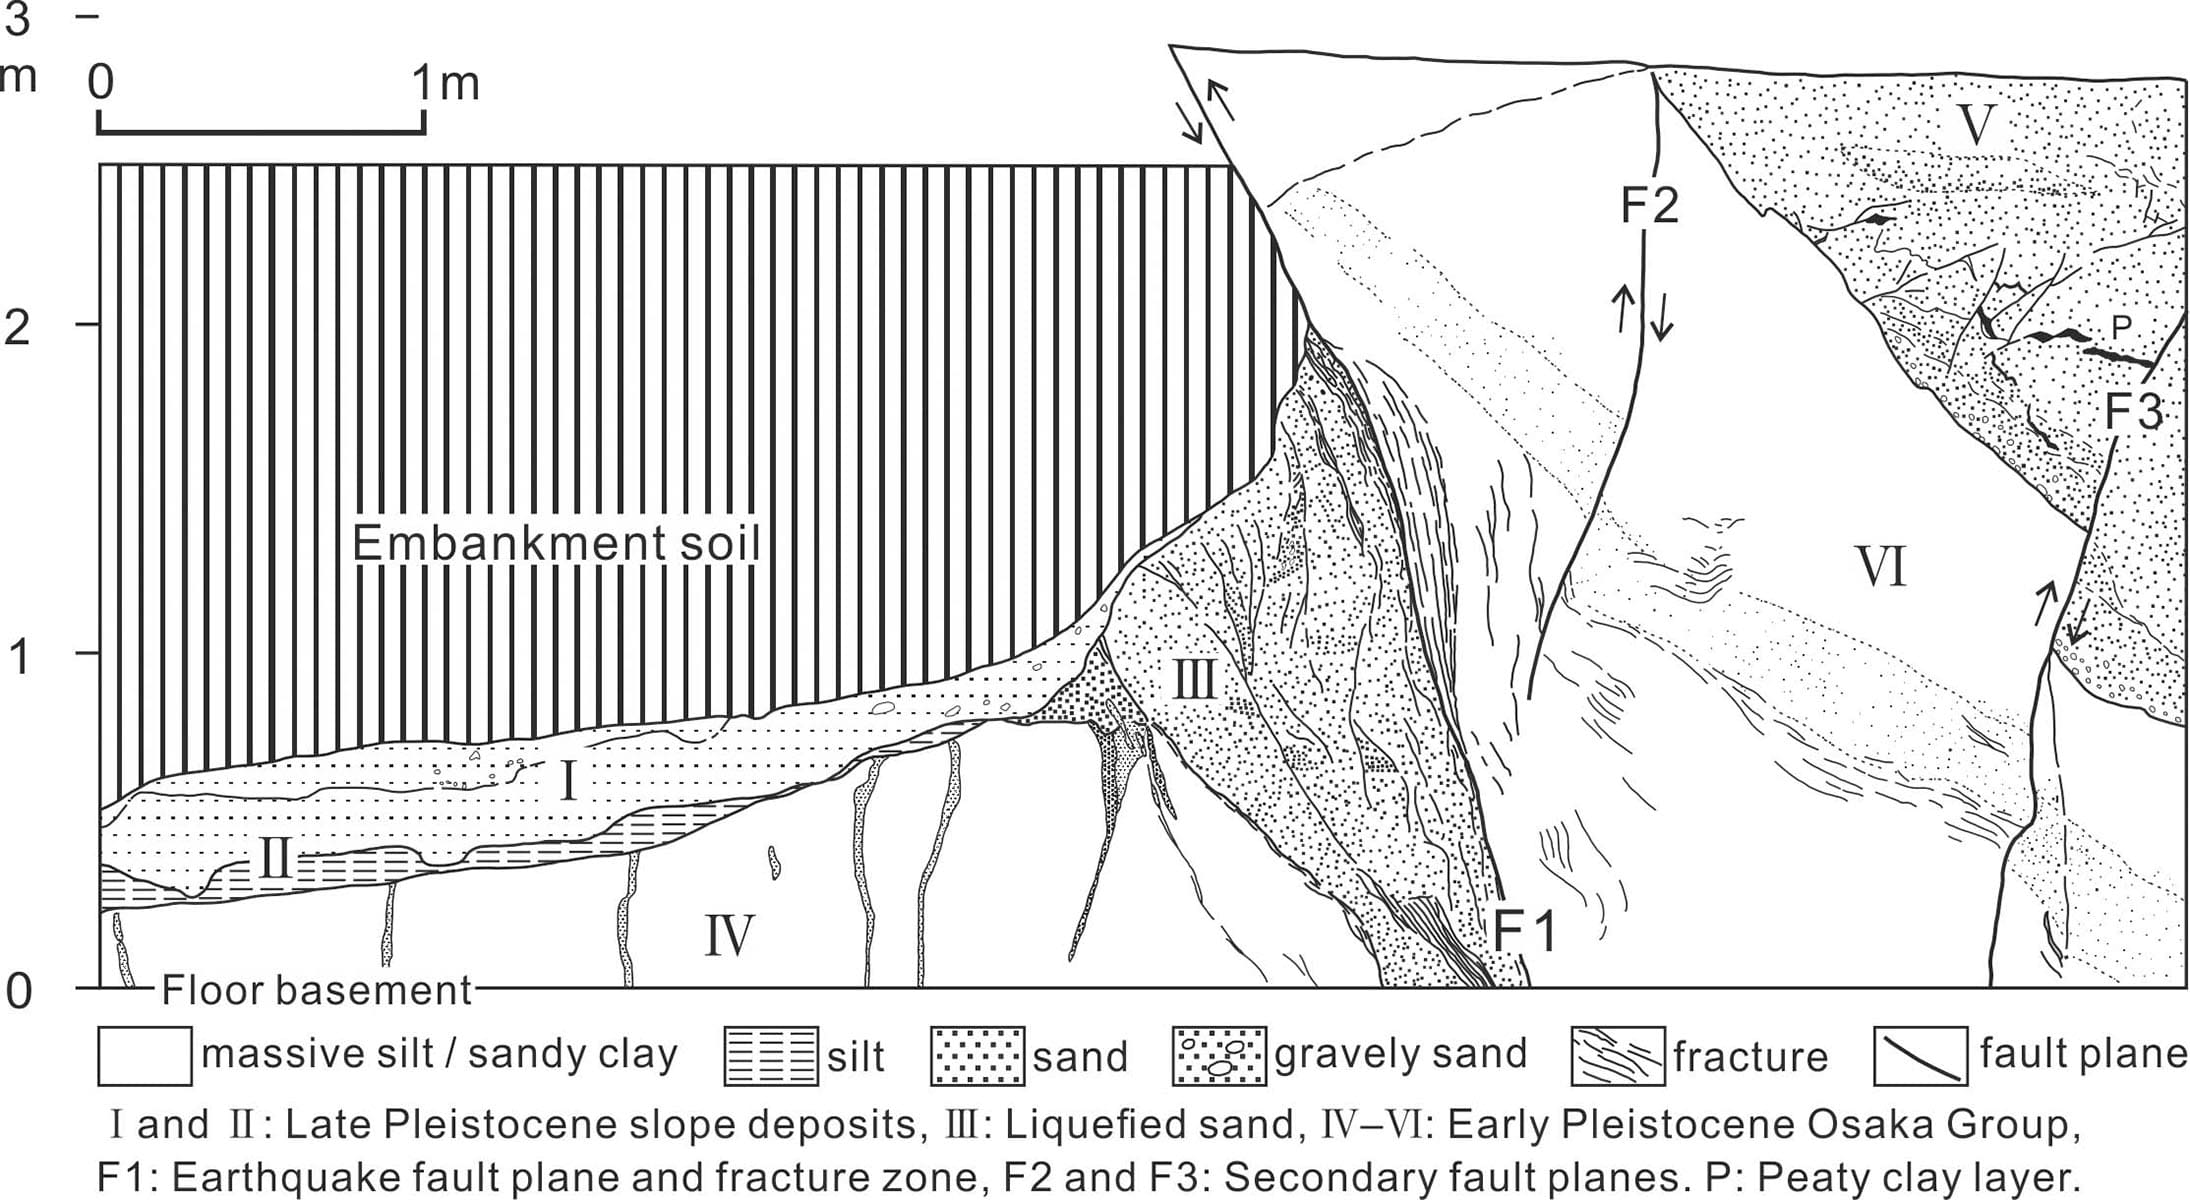 Sketch of the northeastern section of the earthquake trench inside the preservation pavilion